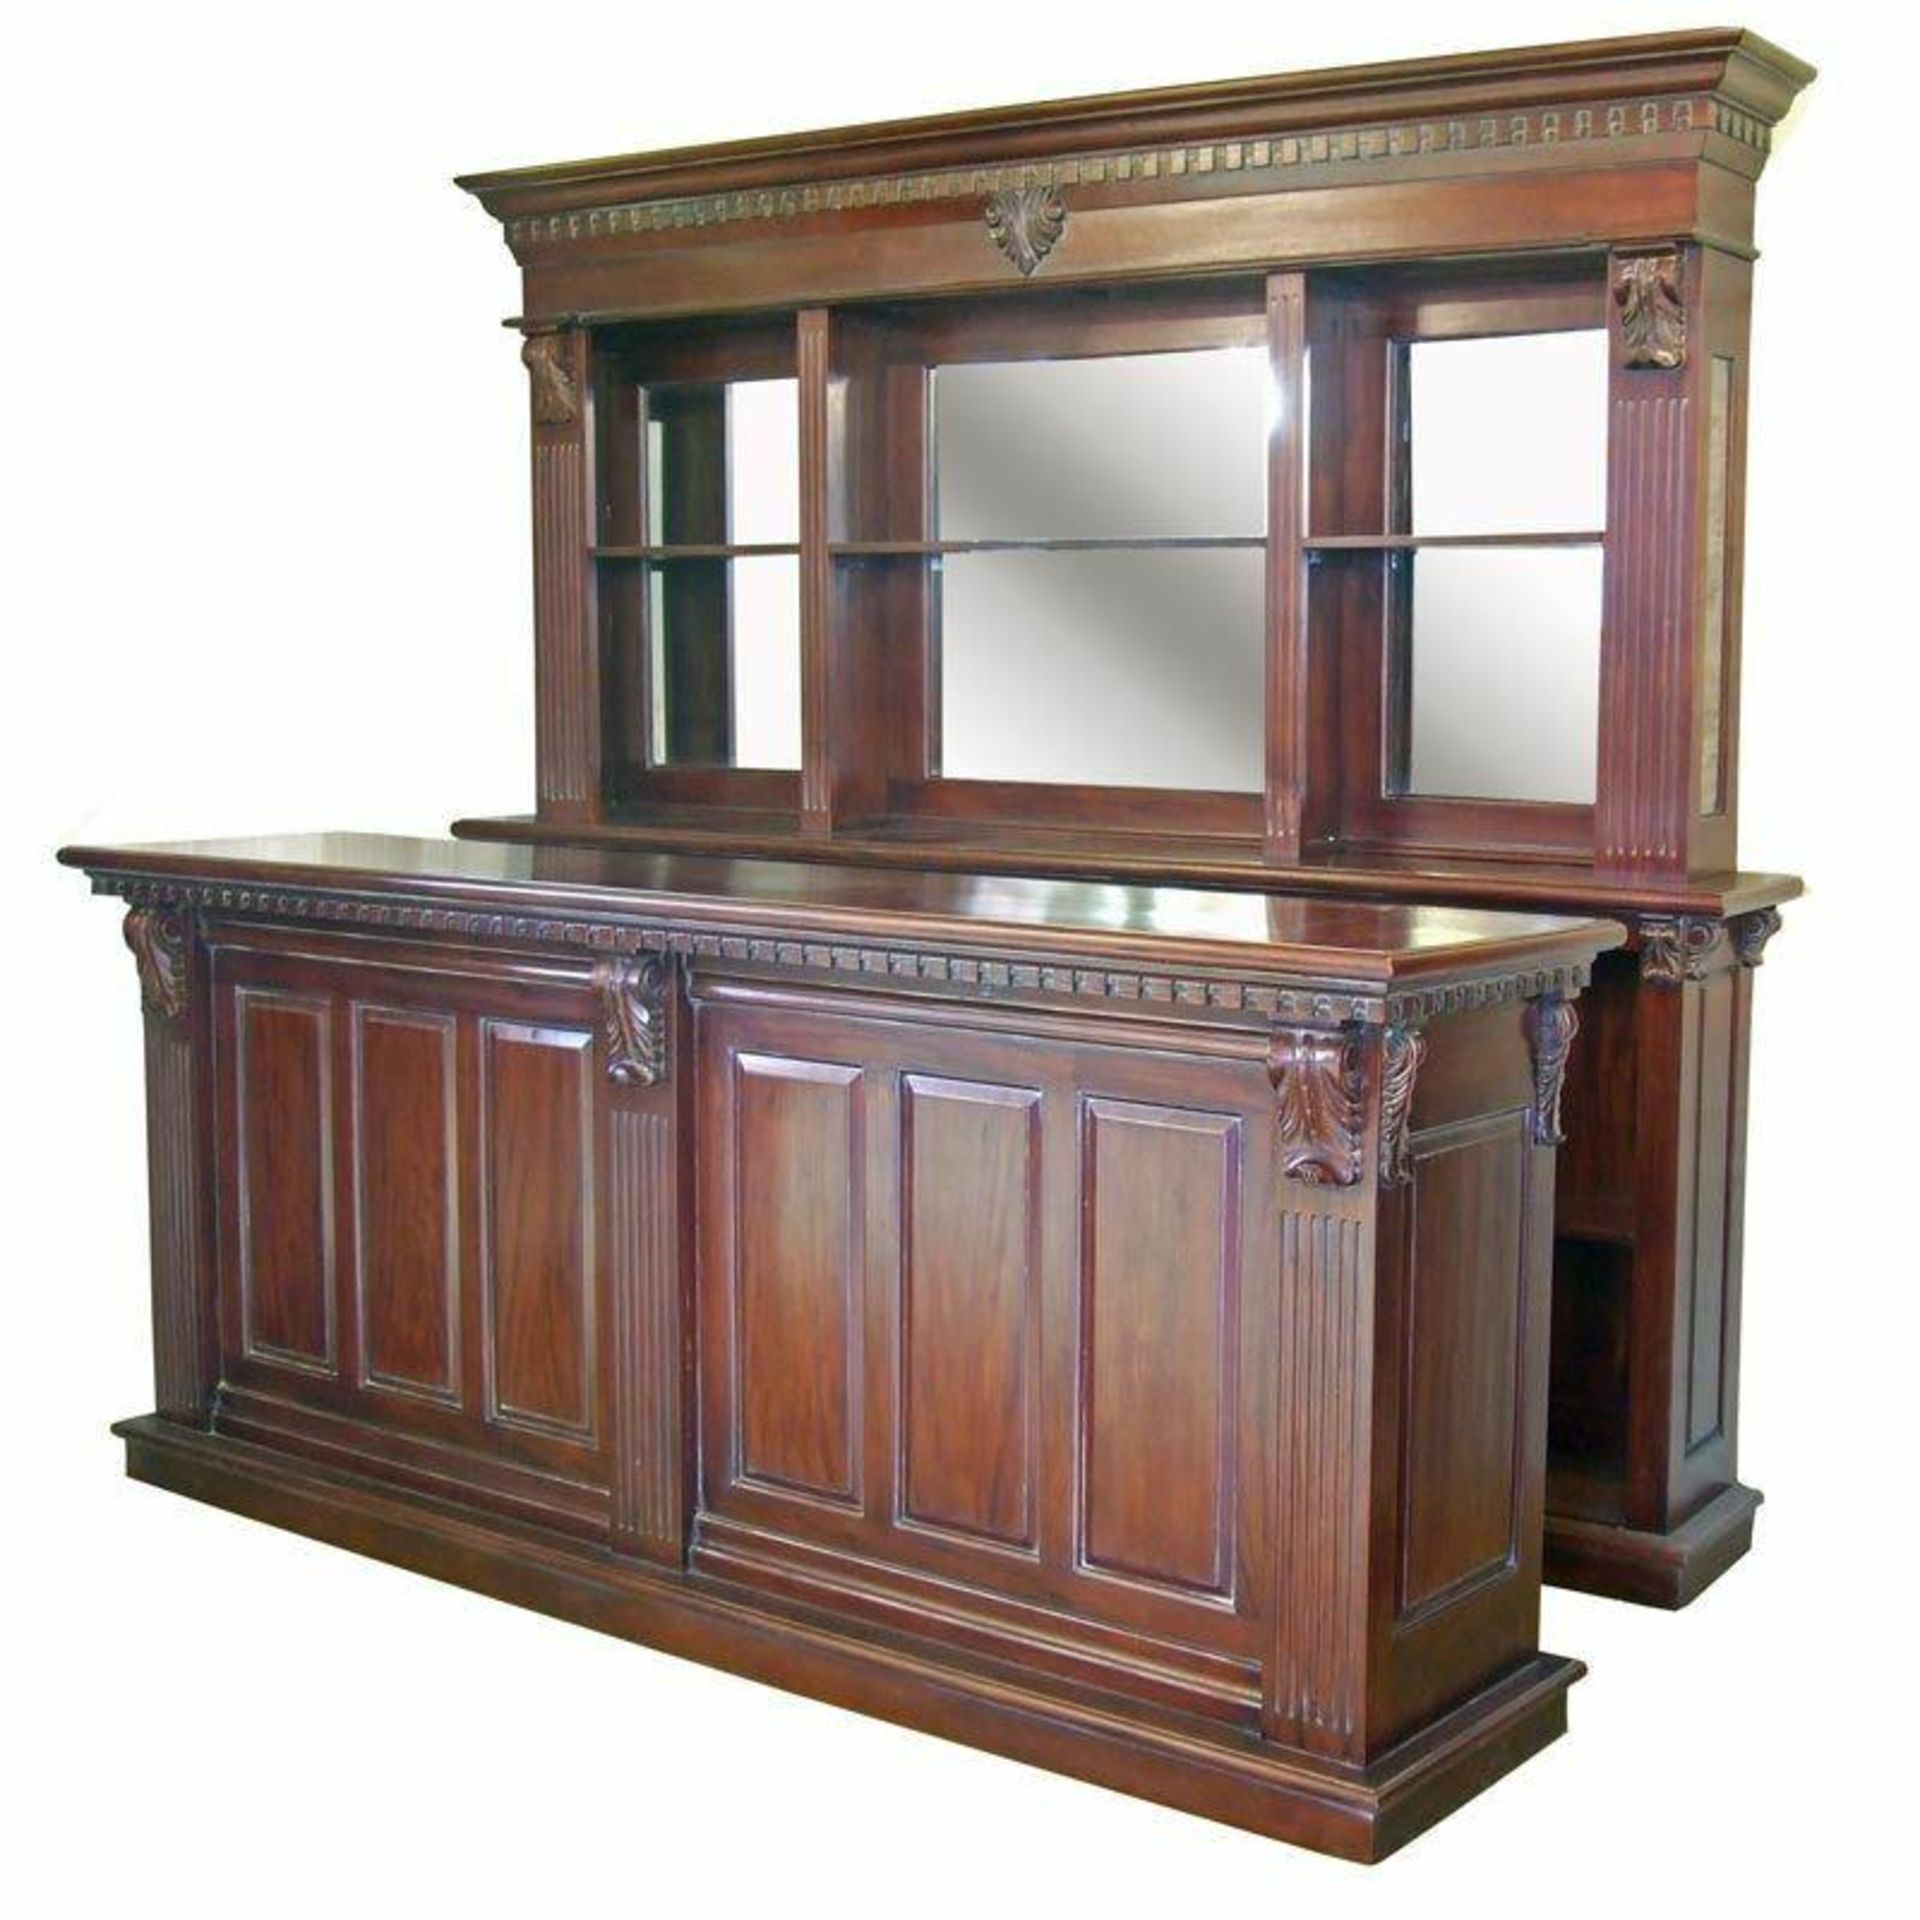 NEW PACKAGED 2.6M SOLID MAHOGANY FRONT BAR AND BACK BAR FULLY SHELVED/MIRRORED